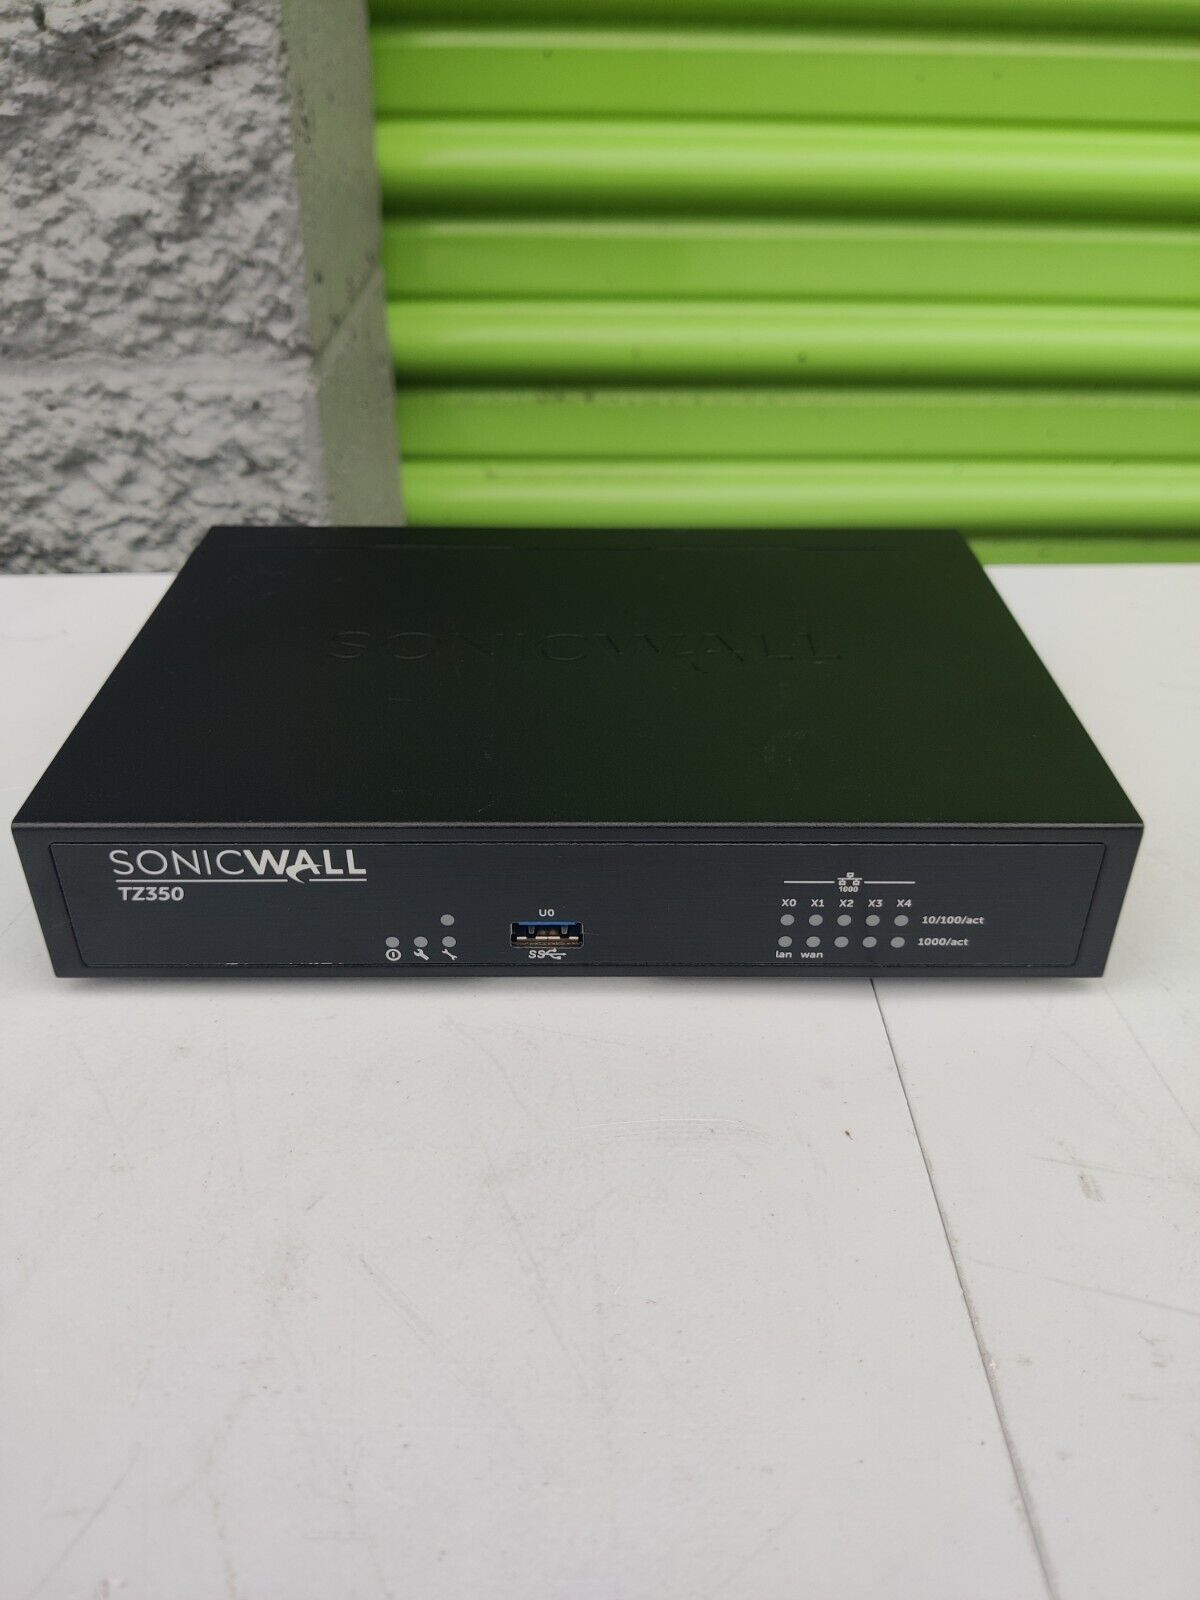 SONICWALL TZ350 NETWORK SECURITY FIREWALL